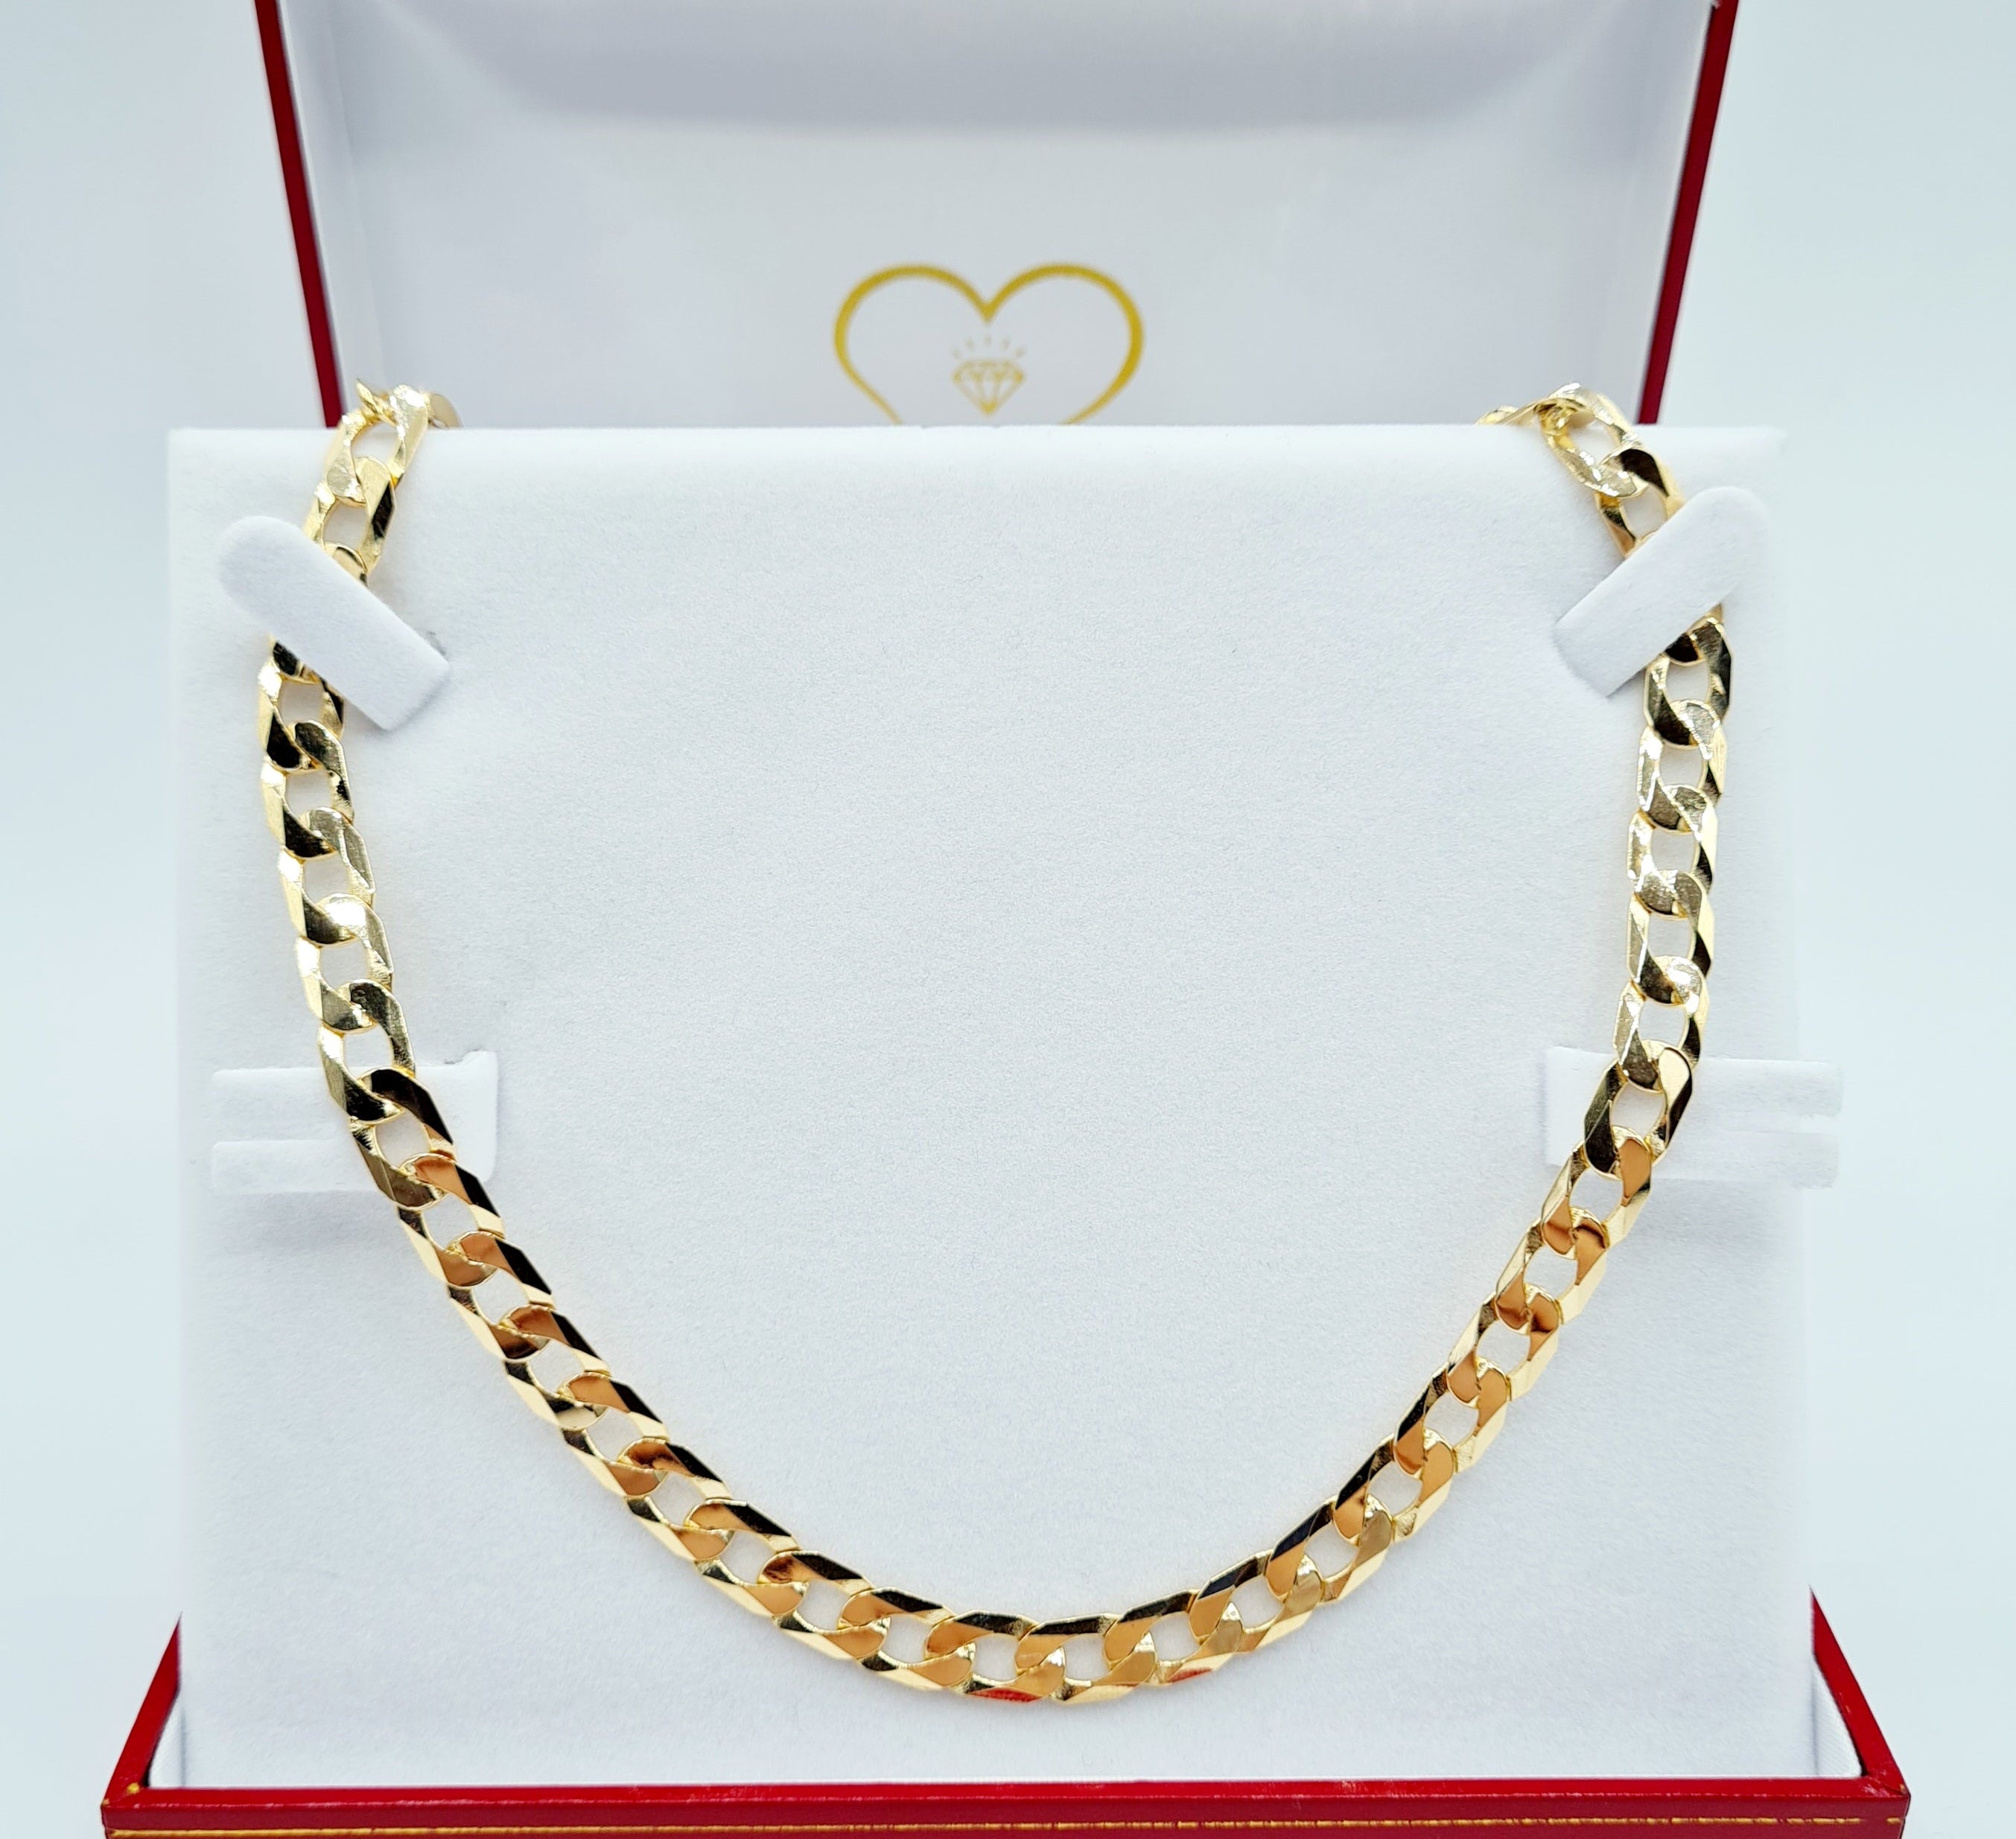 9ct Gold Curb Chain - Forever Jewellers Cork  Forever Jewellers Cork | Forever Jewellers, Maria Gleeson Jewellers, , Forever Jewellery,  Gold and Silver rings, tennis sets, bracelets, Ladies Ring Sets, Bridal Ring Sets. Engagement Rings | Cork. childrens. Kids Jewellery. womens jewellery. Cork Mens rolex style jewellery. cork. free. curb bracelet. jewellery cork city. College Ring. Womens. bangles. christening wedding bride to be Jewellers Cork . Engagement Ring, Wedding Jewellery Cork. 